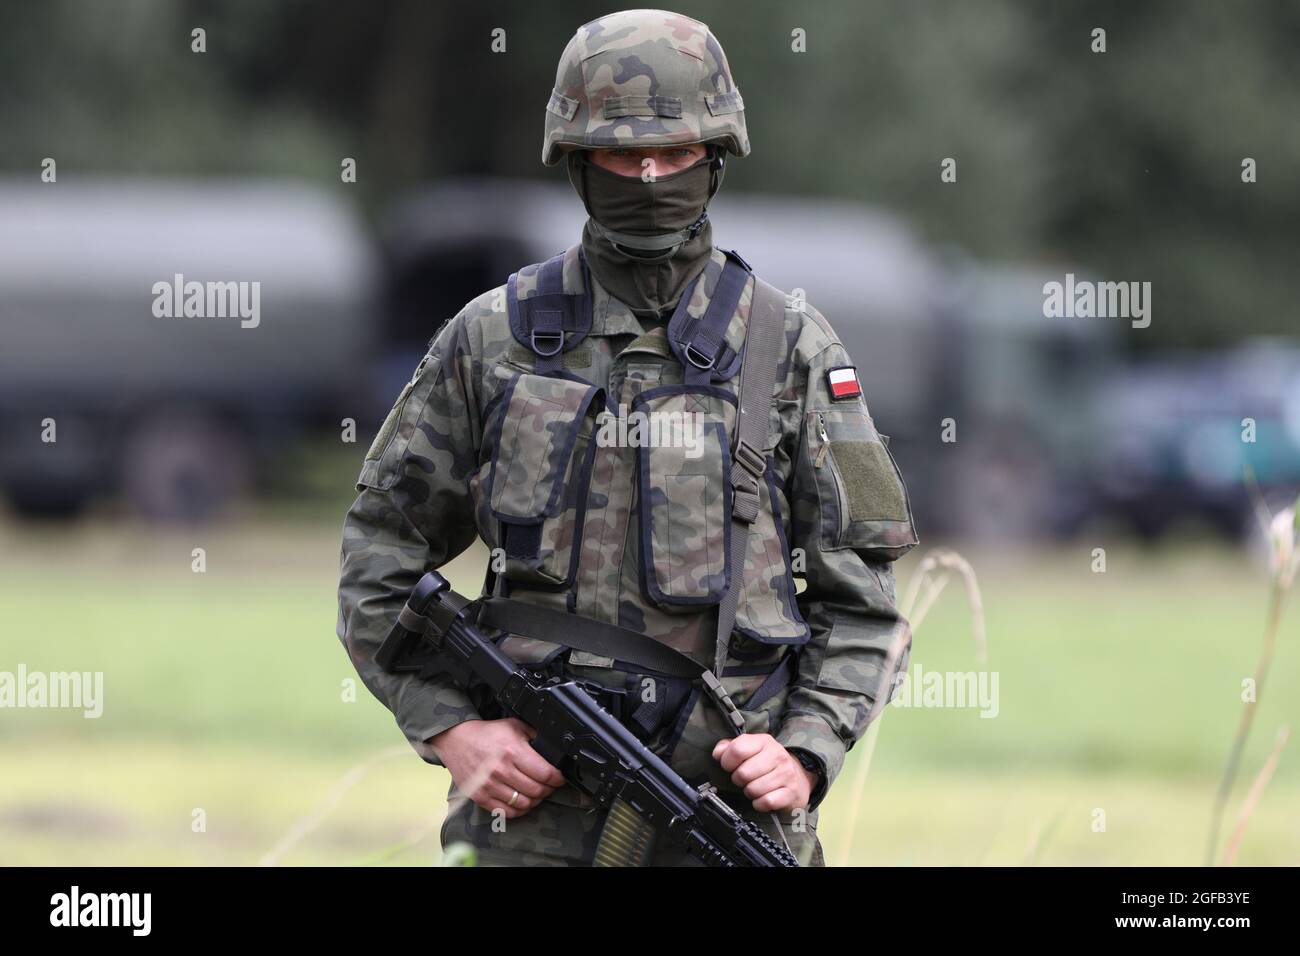 A soldier is seen guarding the area surrounding the border with Belarus where 32 Afghan refugees have been stuck in Usnarz Gorny, Poland on August 24, 2021. For 16 days in a row 32 Afghan refugees have been stuck at the Polsh-Belarusian border without food or shelter. Polish authorities deny the migrants have ever reached Polish soil contraty to reports from local individuals who have stated the group has been pushed back by border guards. In August of this year nearly 3000 refugees have been reported attempting to cross the border compred to less than 100 in all of 2020. The surge in border c Stock Photo